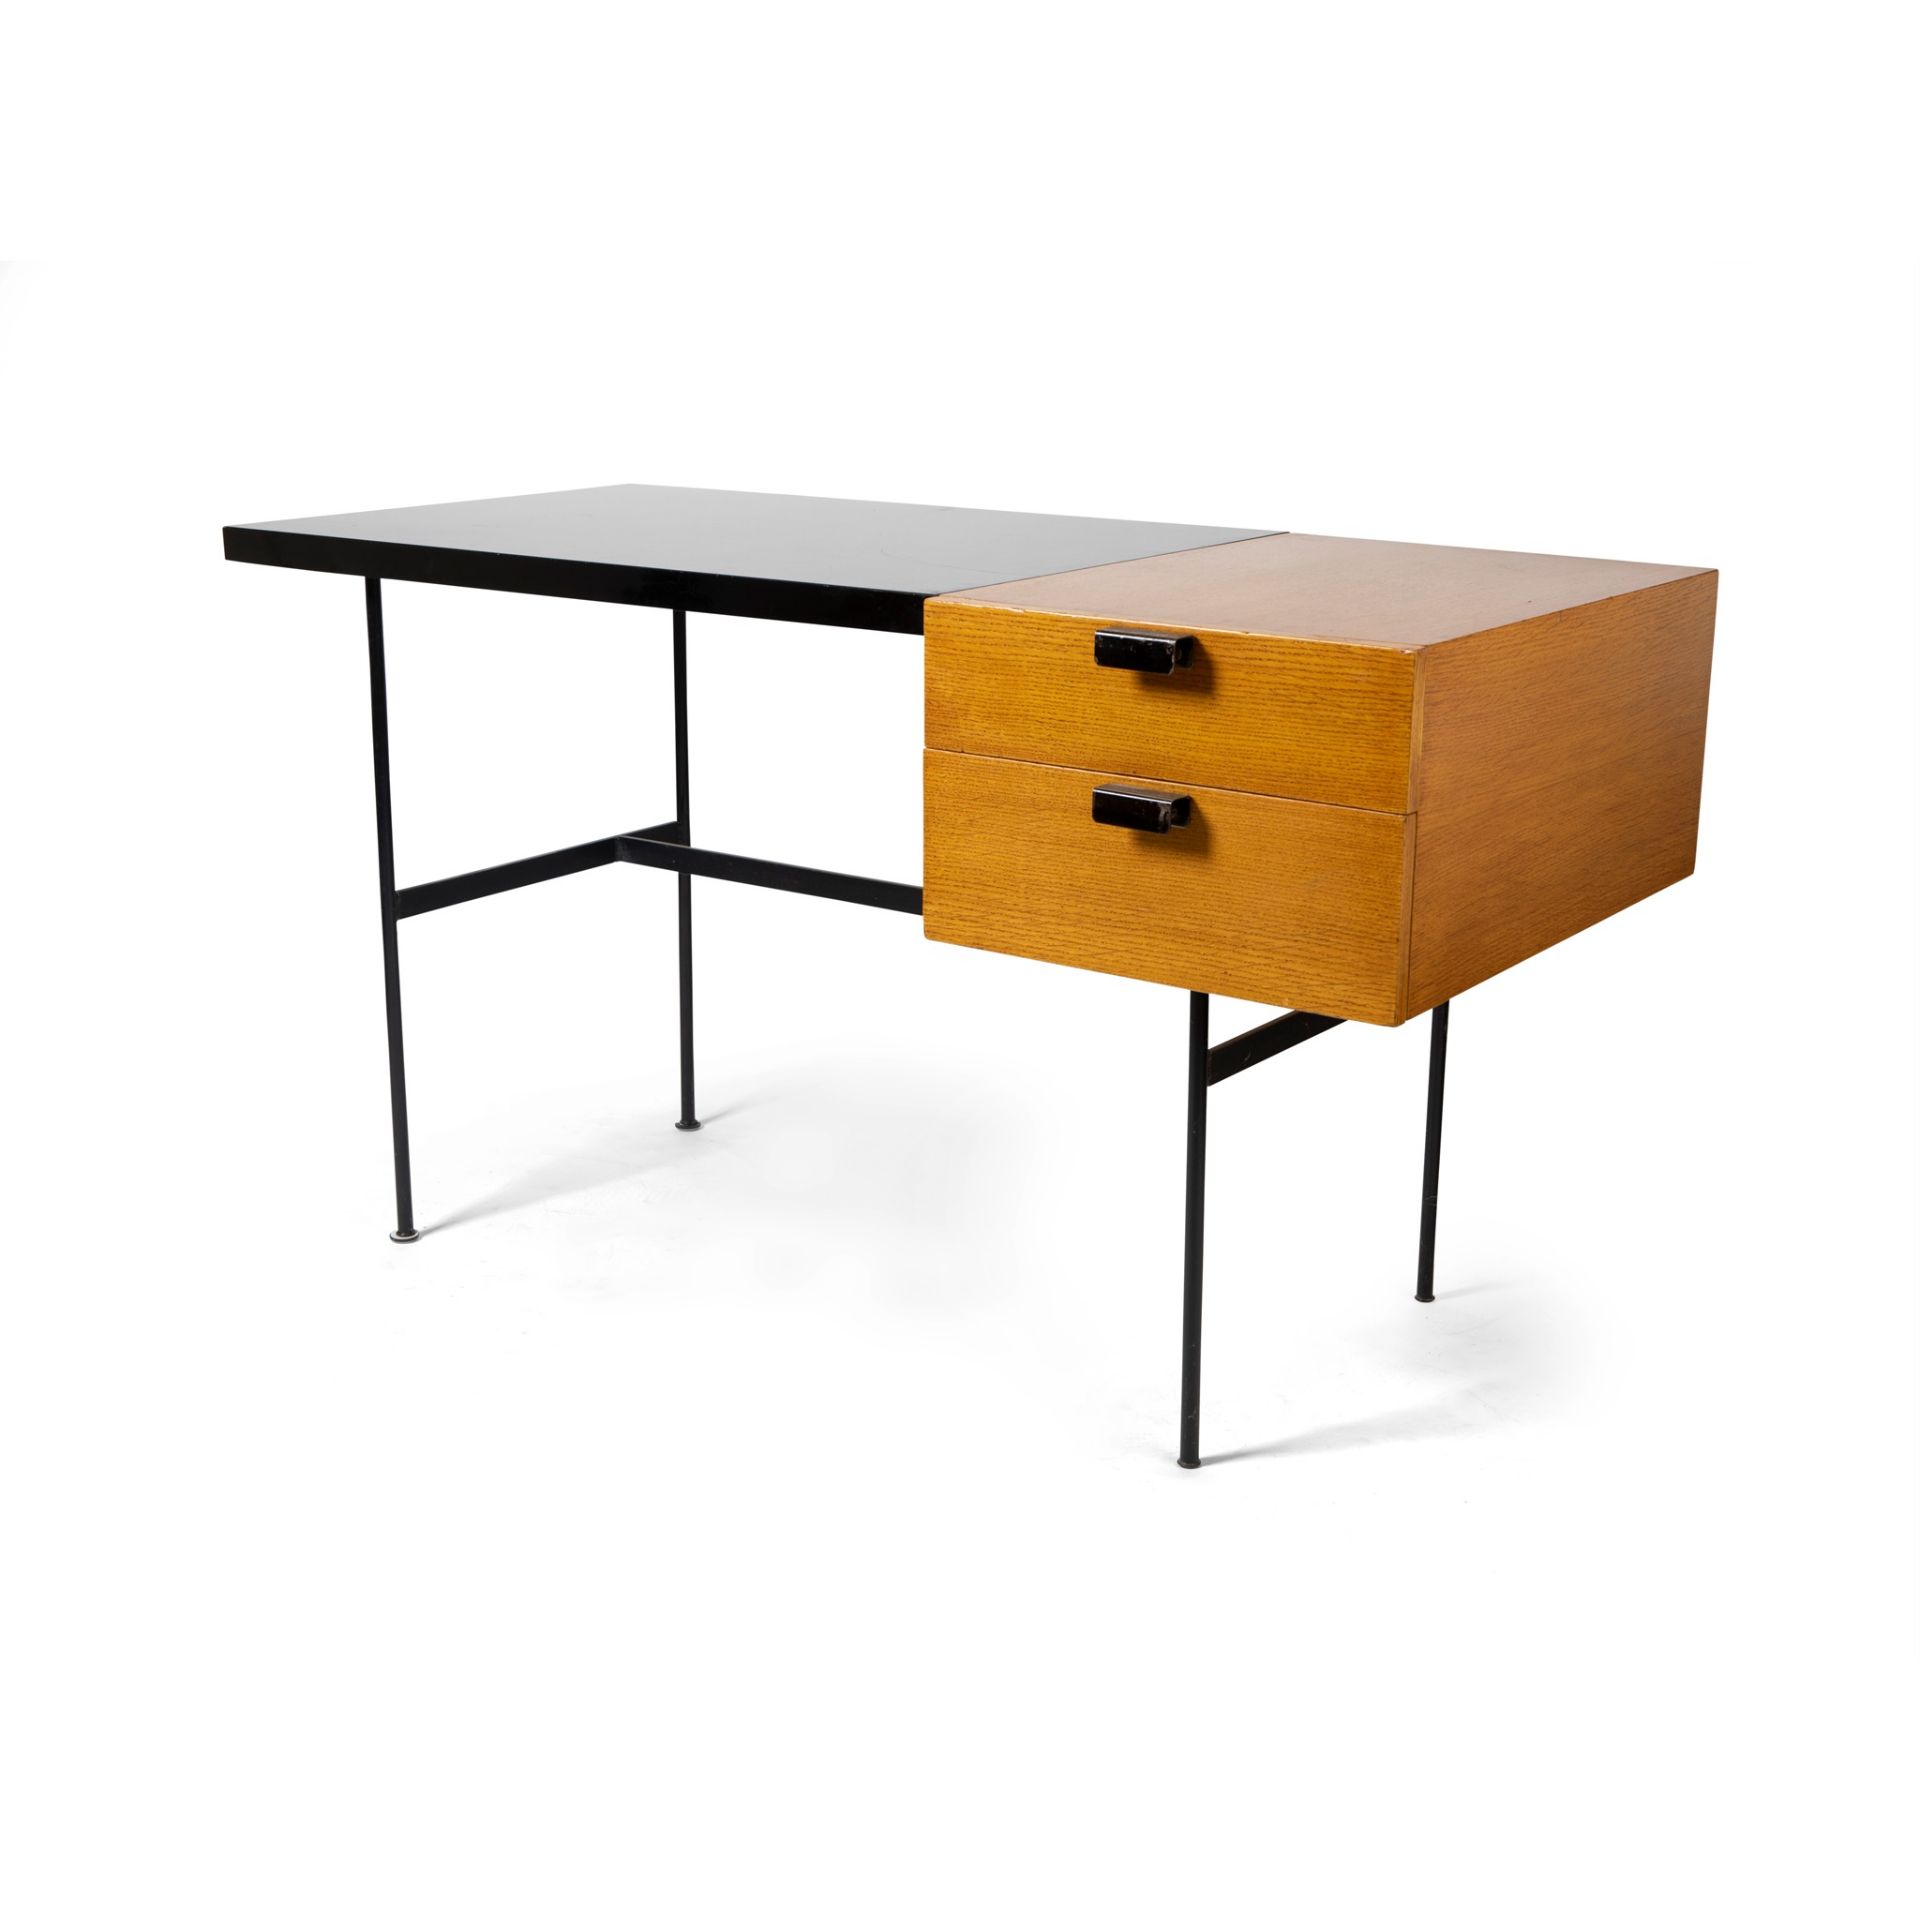 PIERRE PAULIN (FRENCH 1927-2009) FOR THONET DESK, DESIGNED 1953 - Image 2 of 2